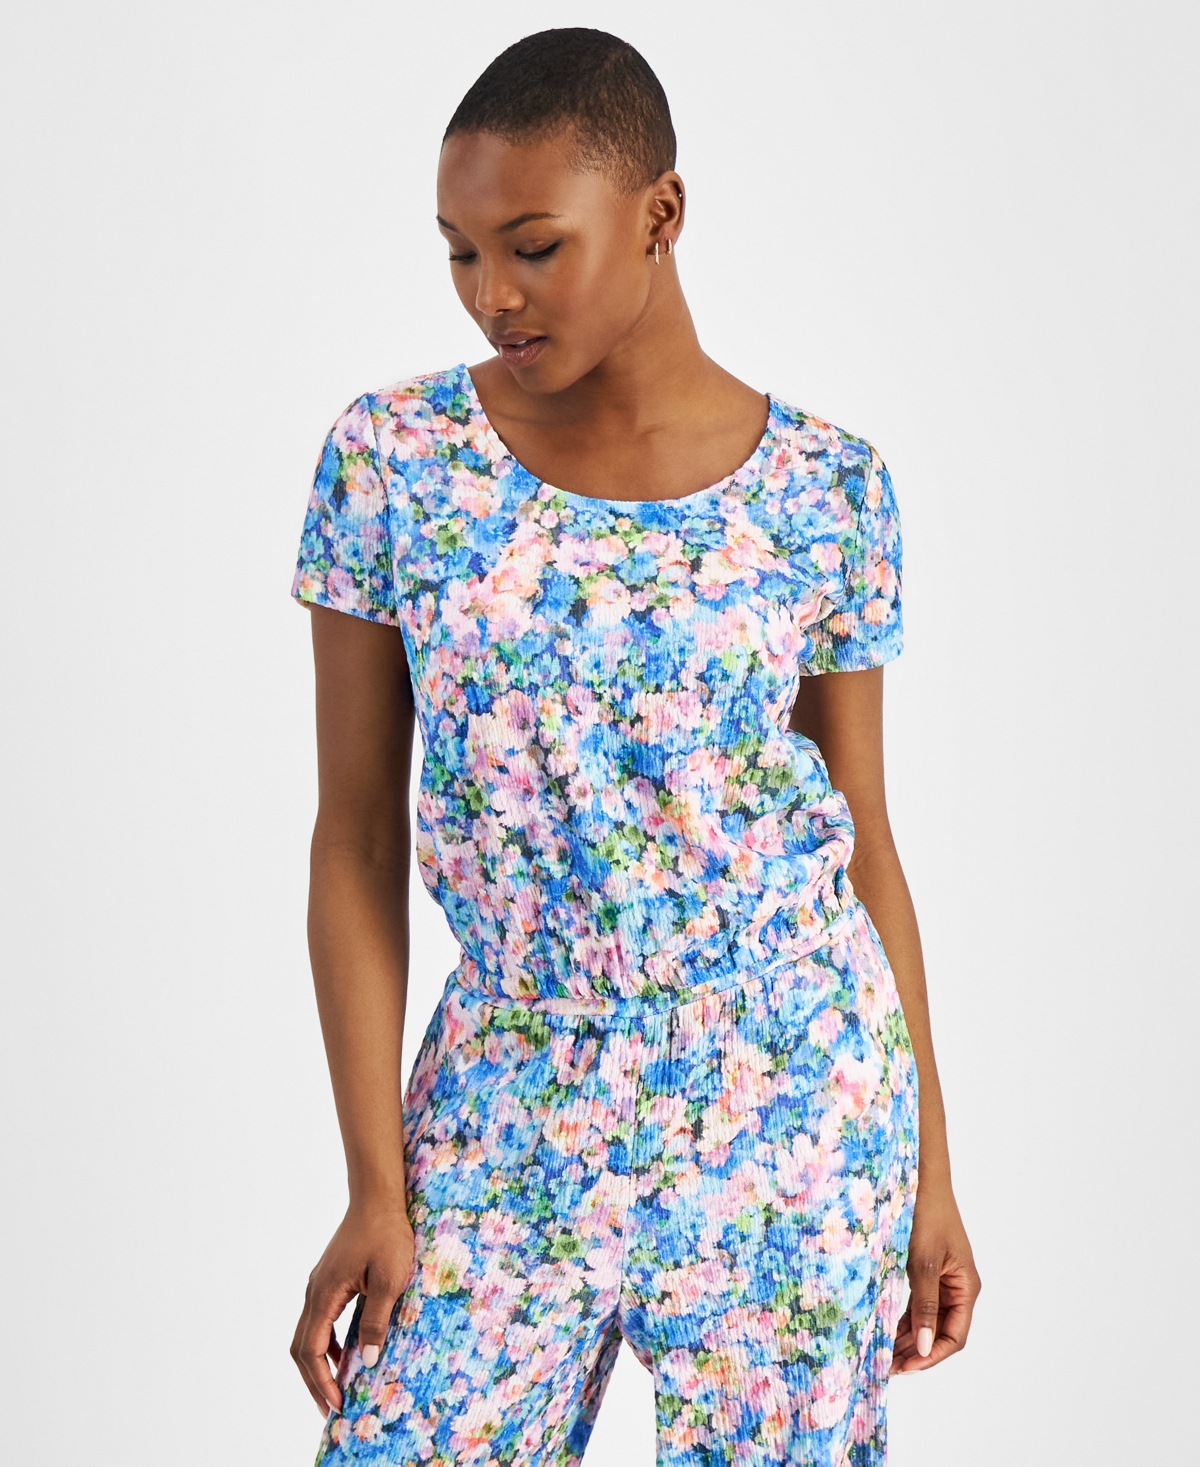 Petite Floral-Print Round-Neck Short-Sleeve Top, Created for Macy's - Lana Floral